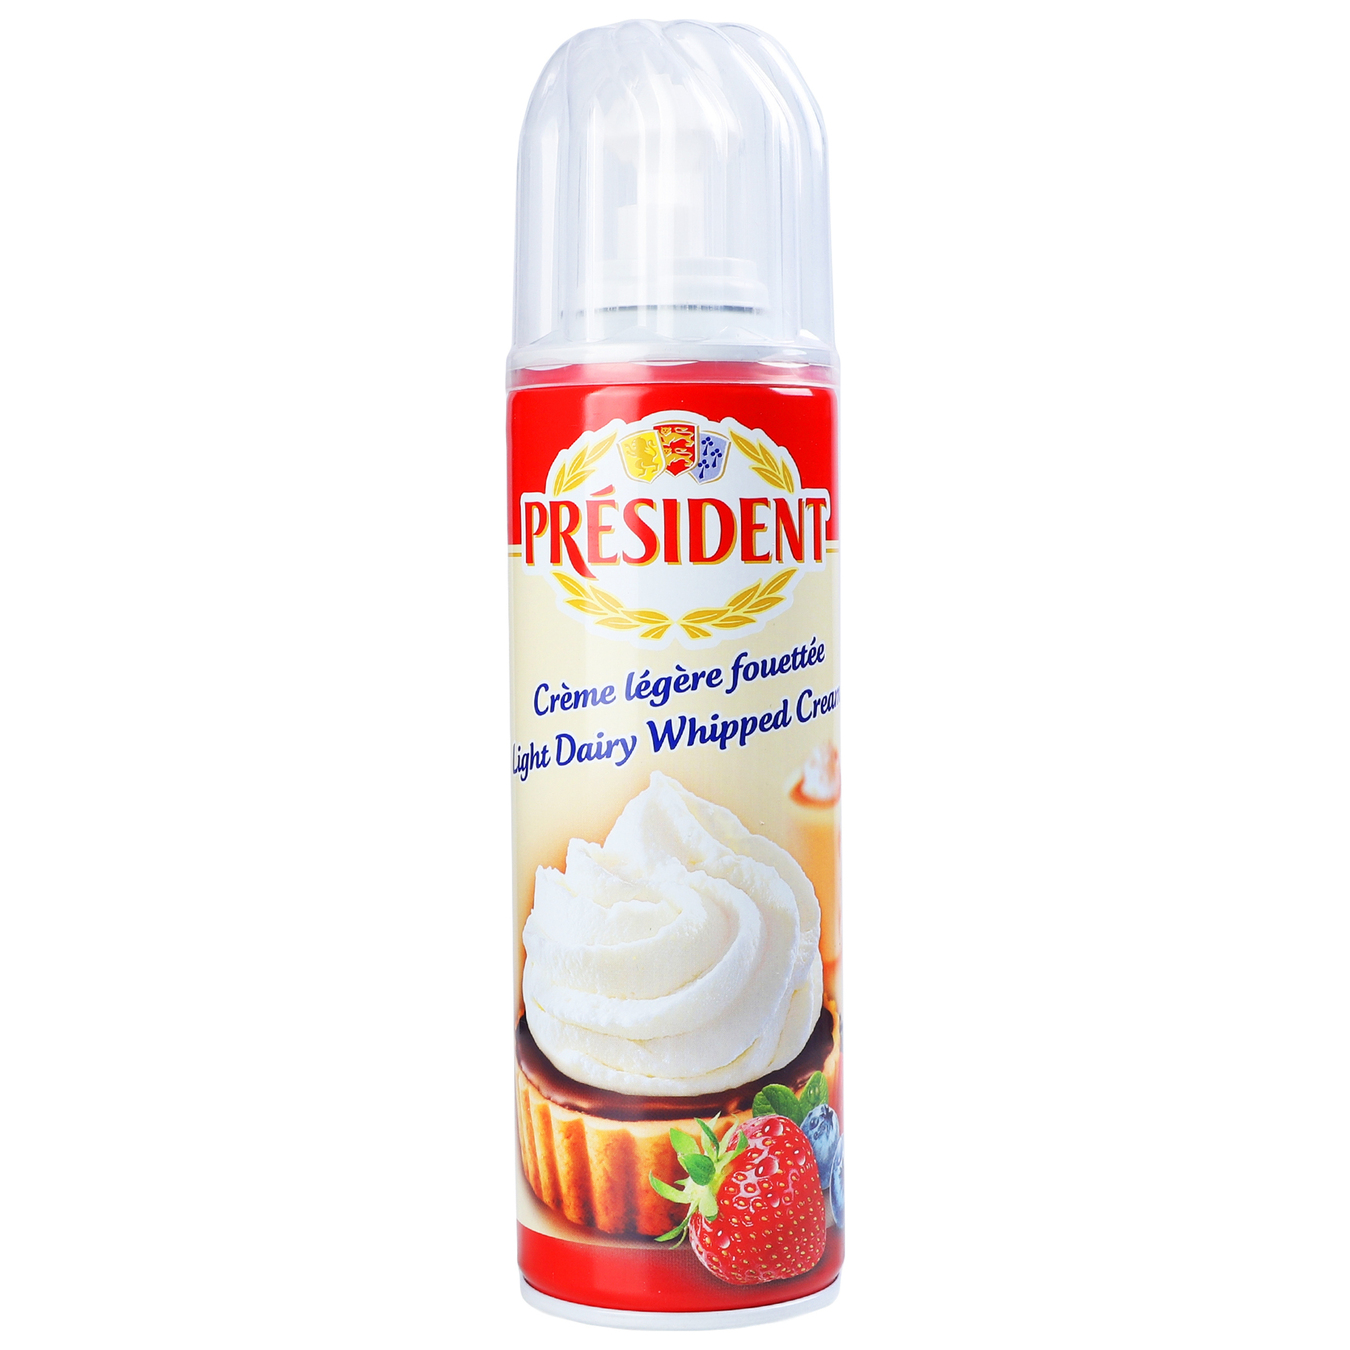 President Whipped dairy cream portioned 20% 250g